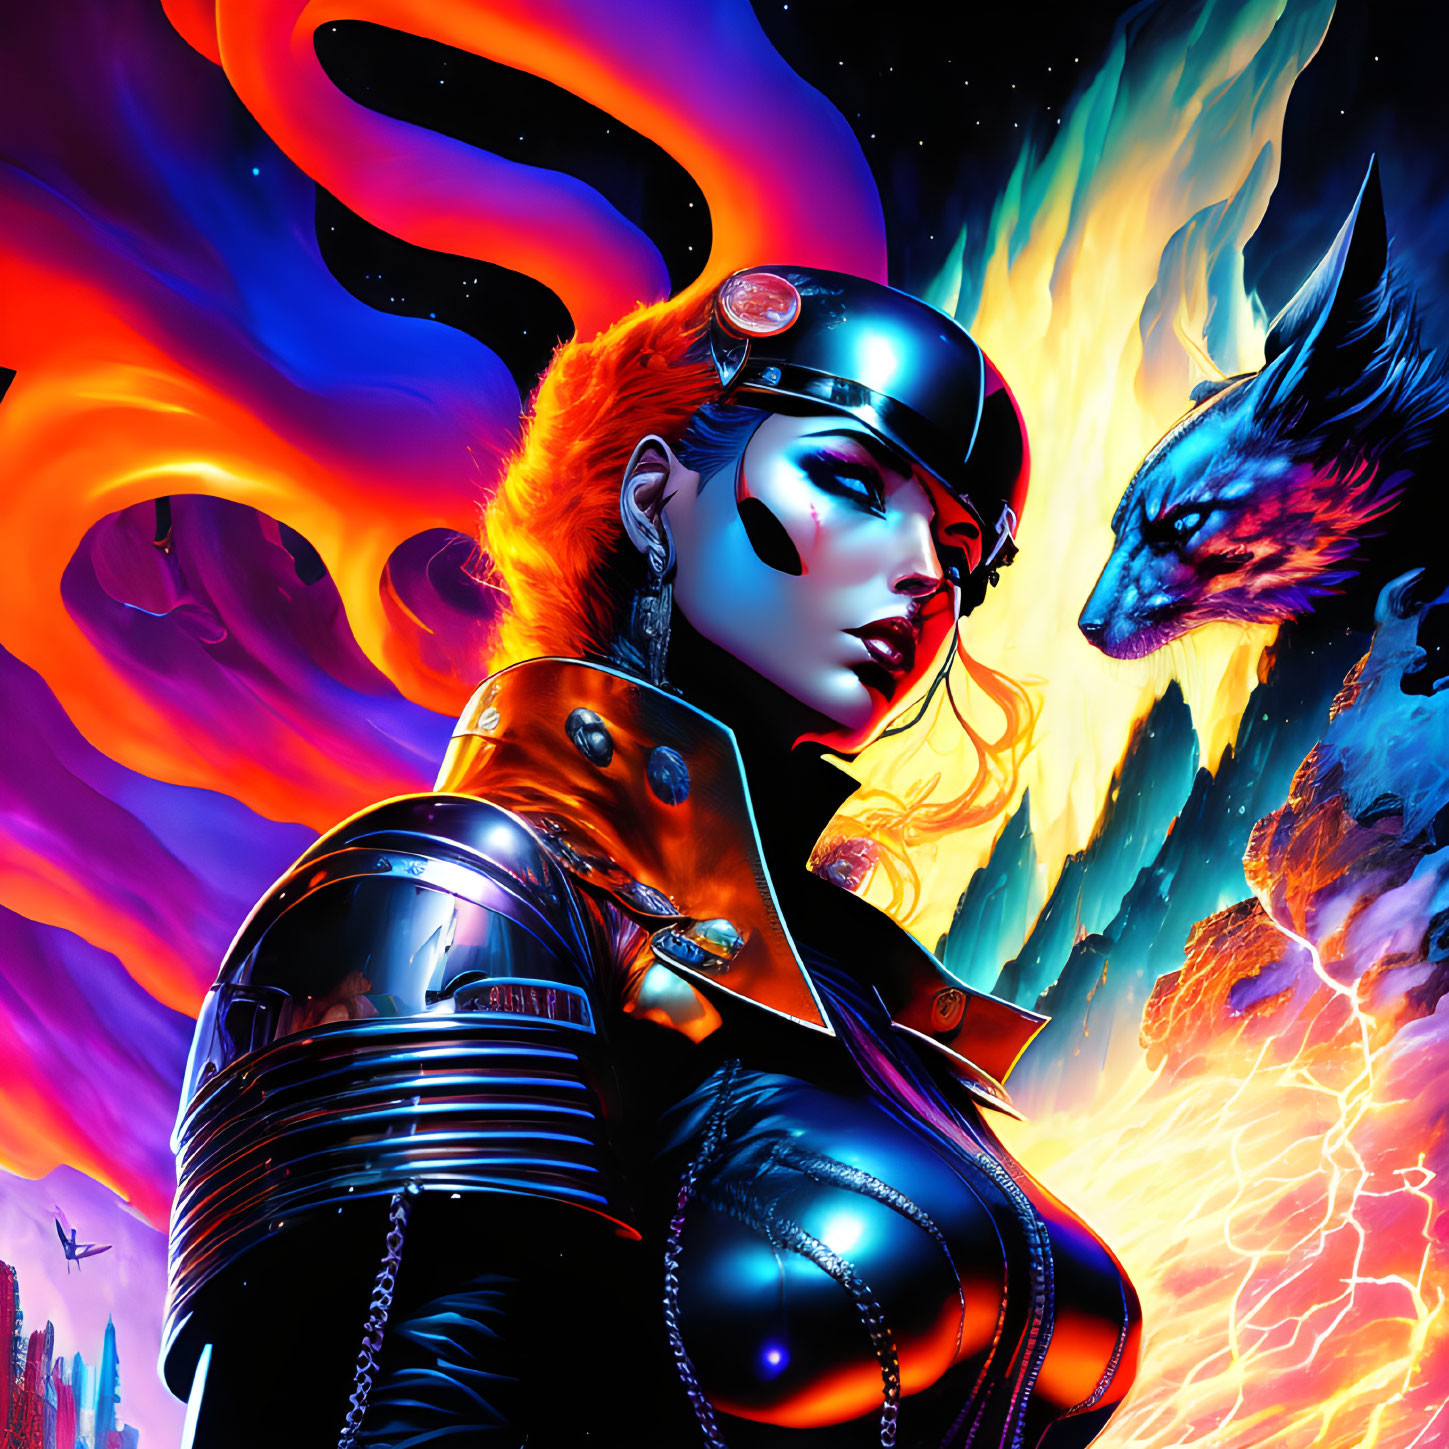 Illustration of woman in futuristic armor with wolf creature in cosmic setting